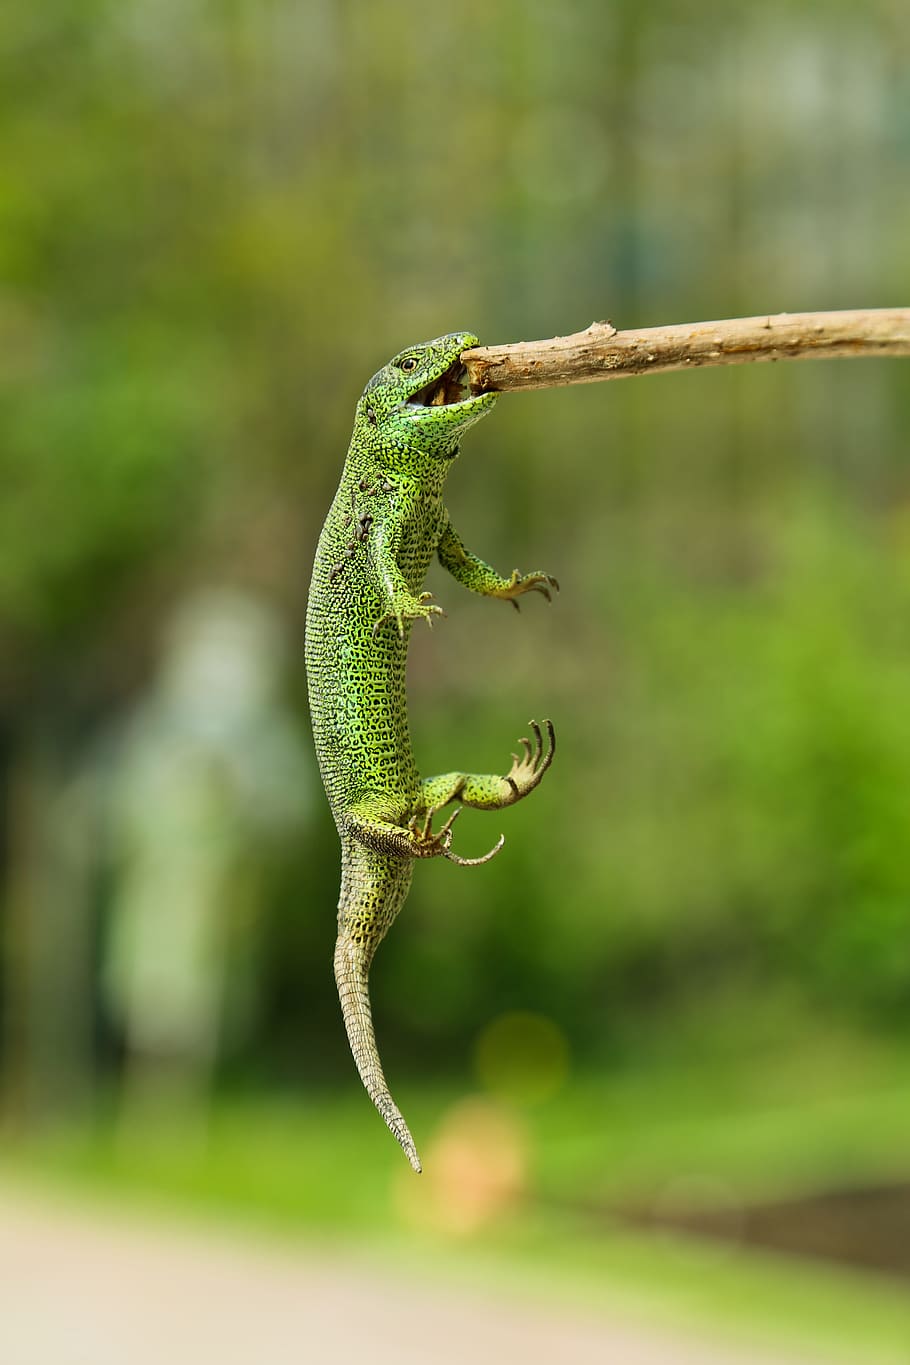 green, lizard bitting, stick, nature, animals, lizard, reptile, focus on foreground, green color, animal themes